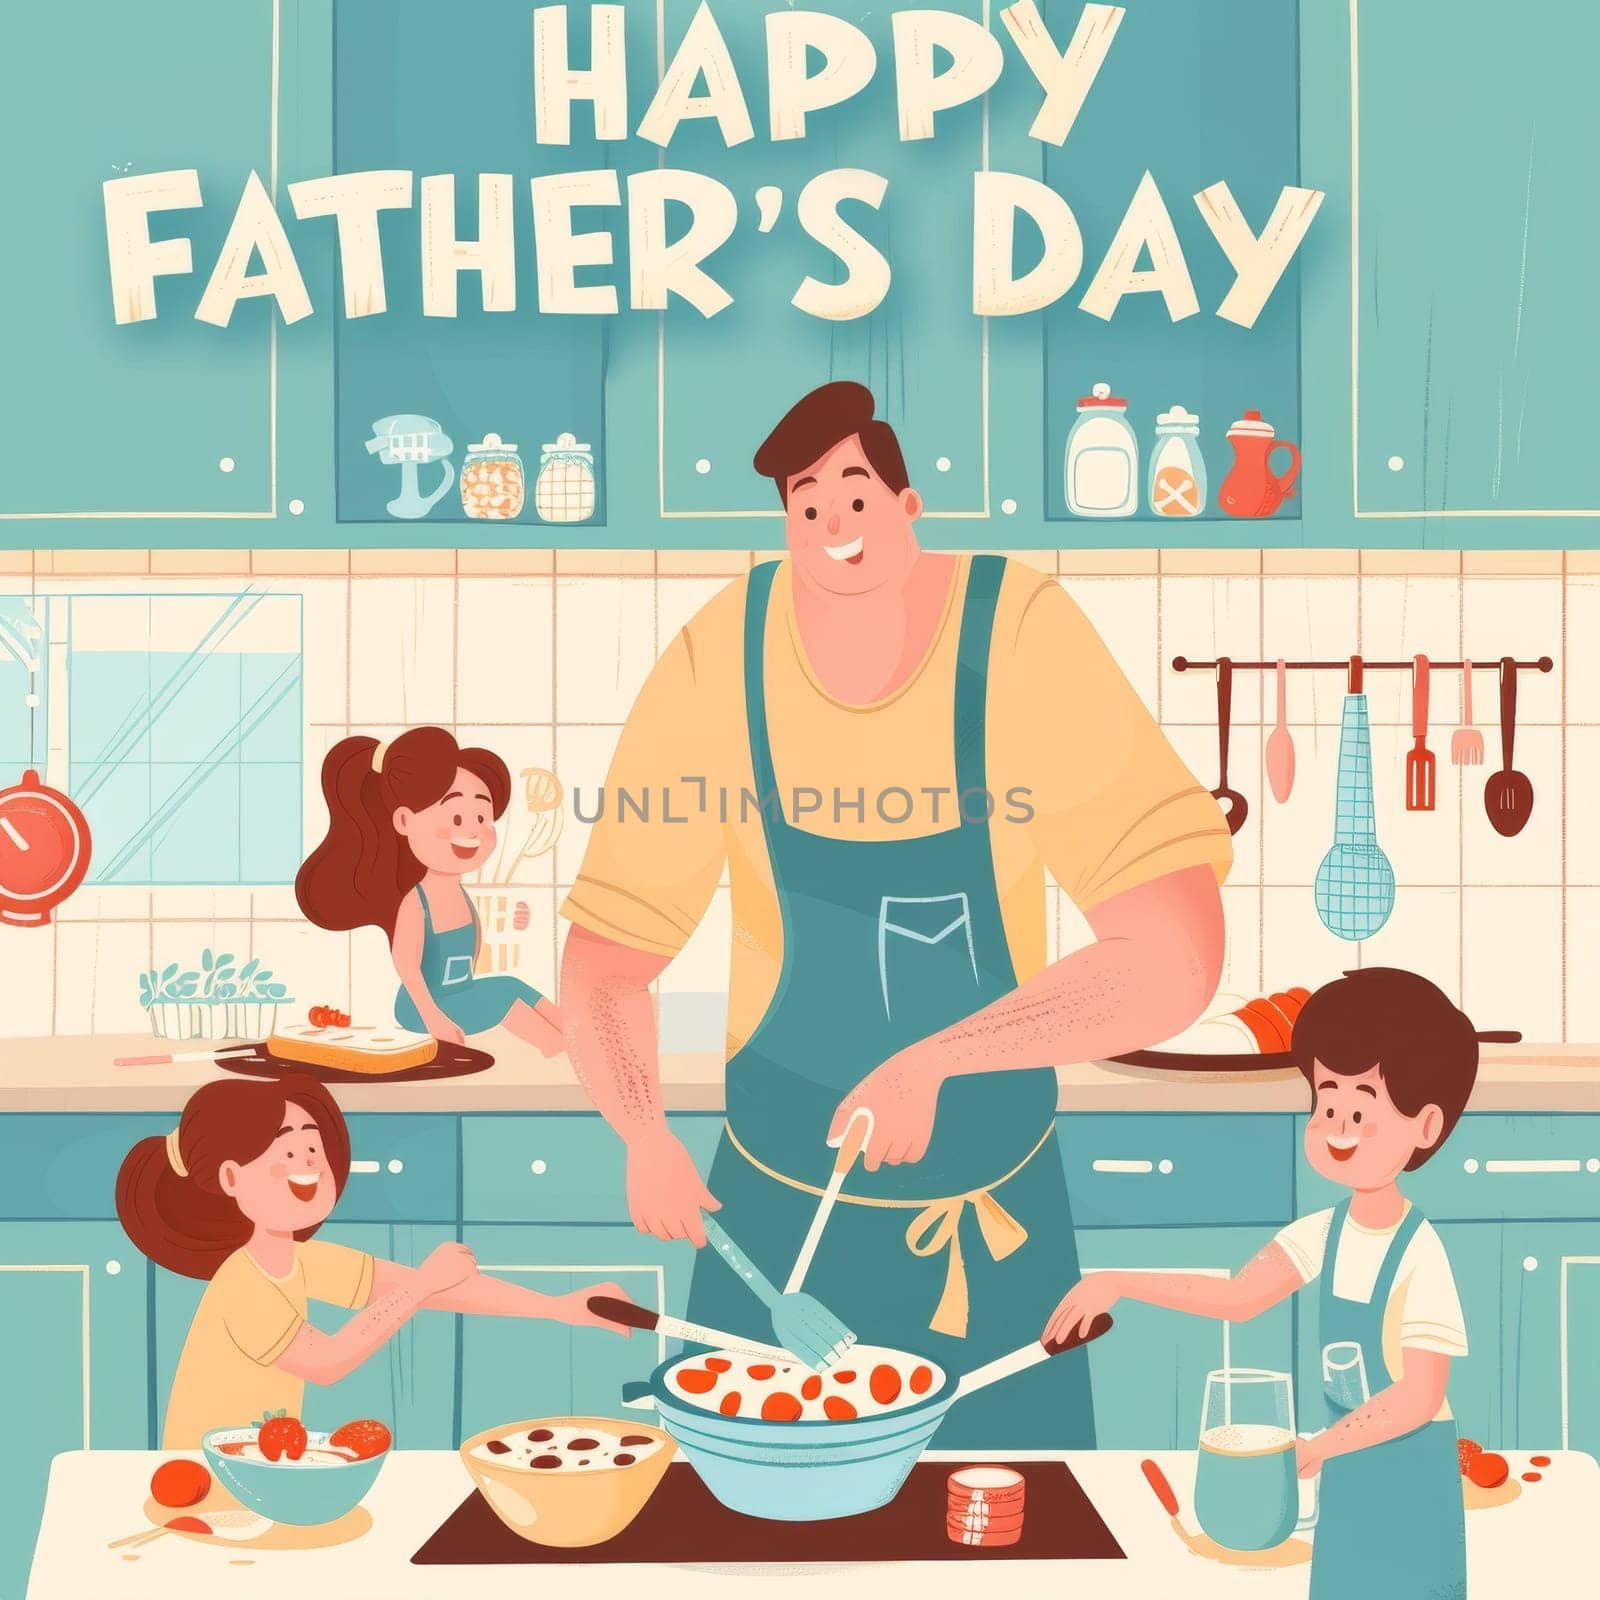 Animated illustration of a dad cooking with his kids in a kitchen, celebrating Fathers Day with a home-cooked meal and smiles